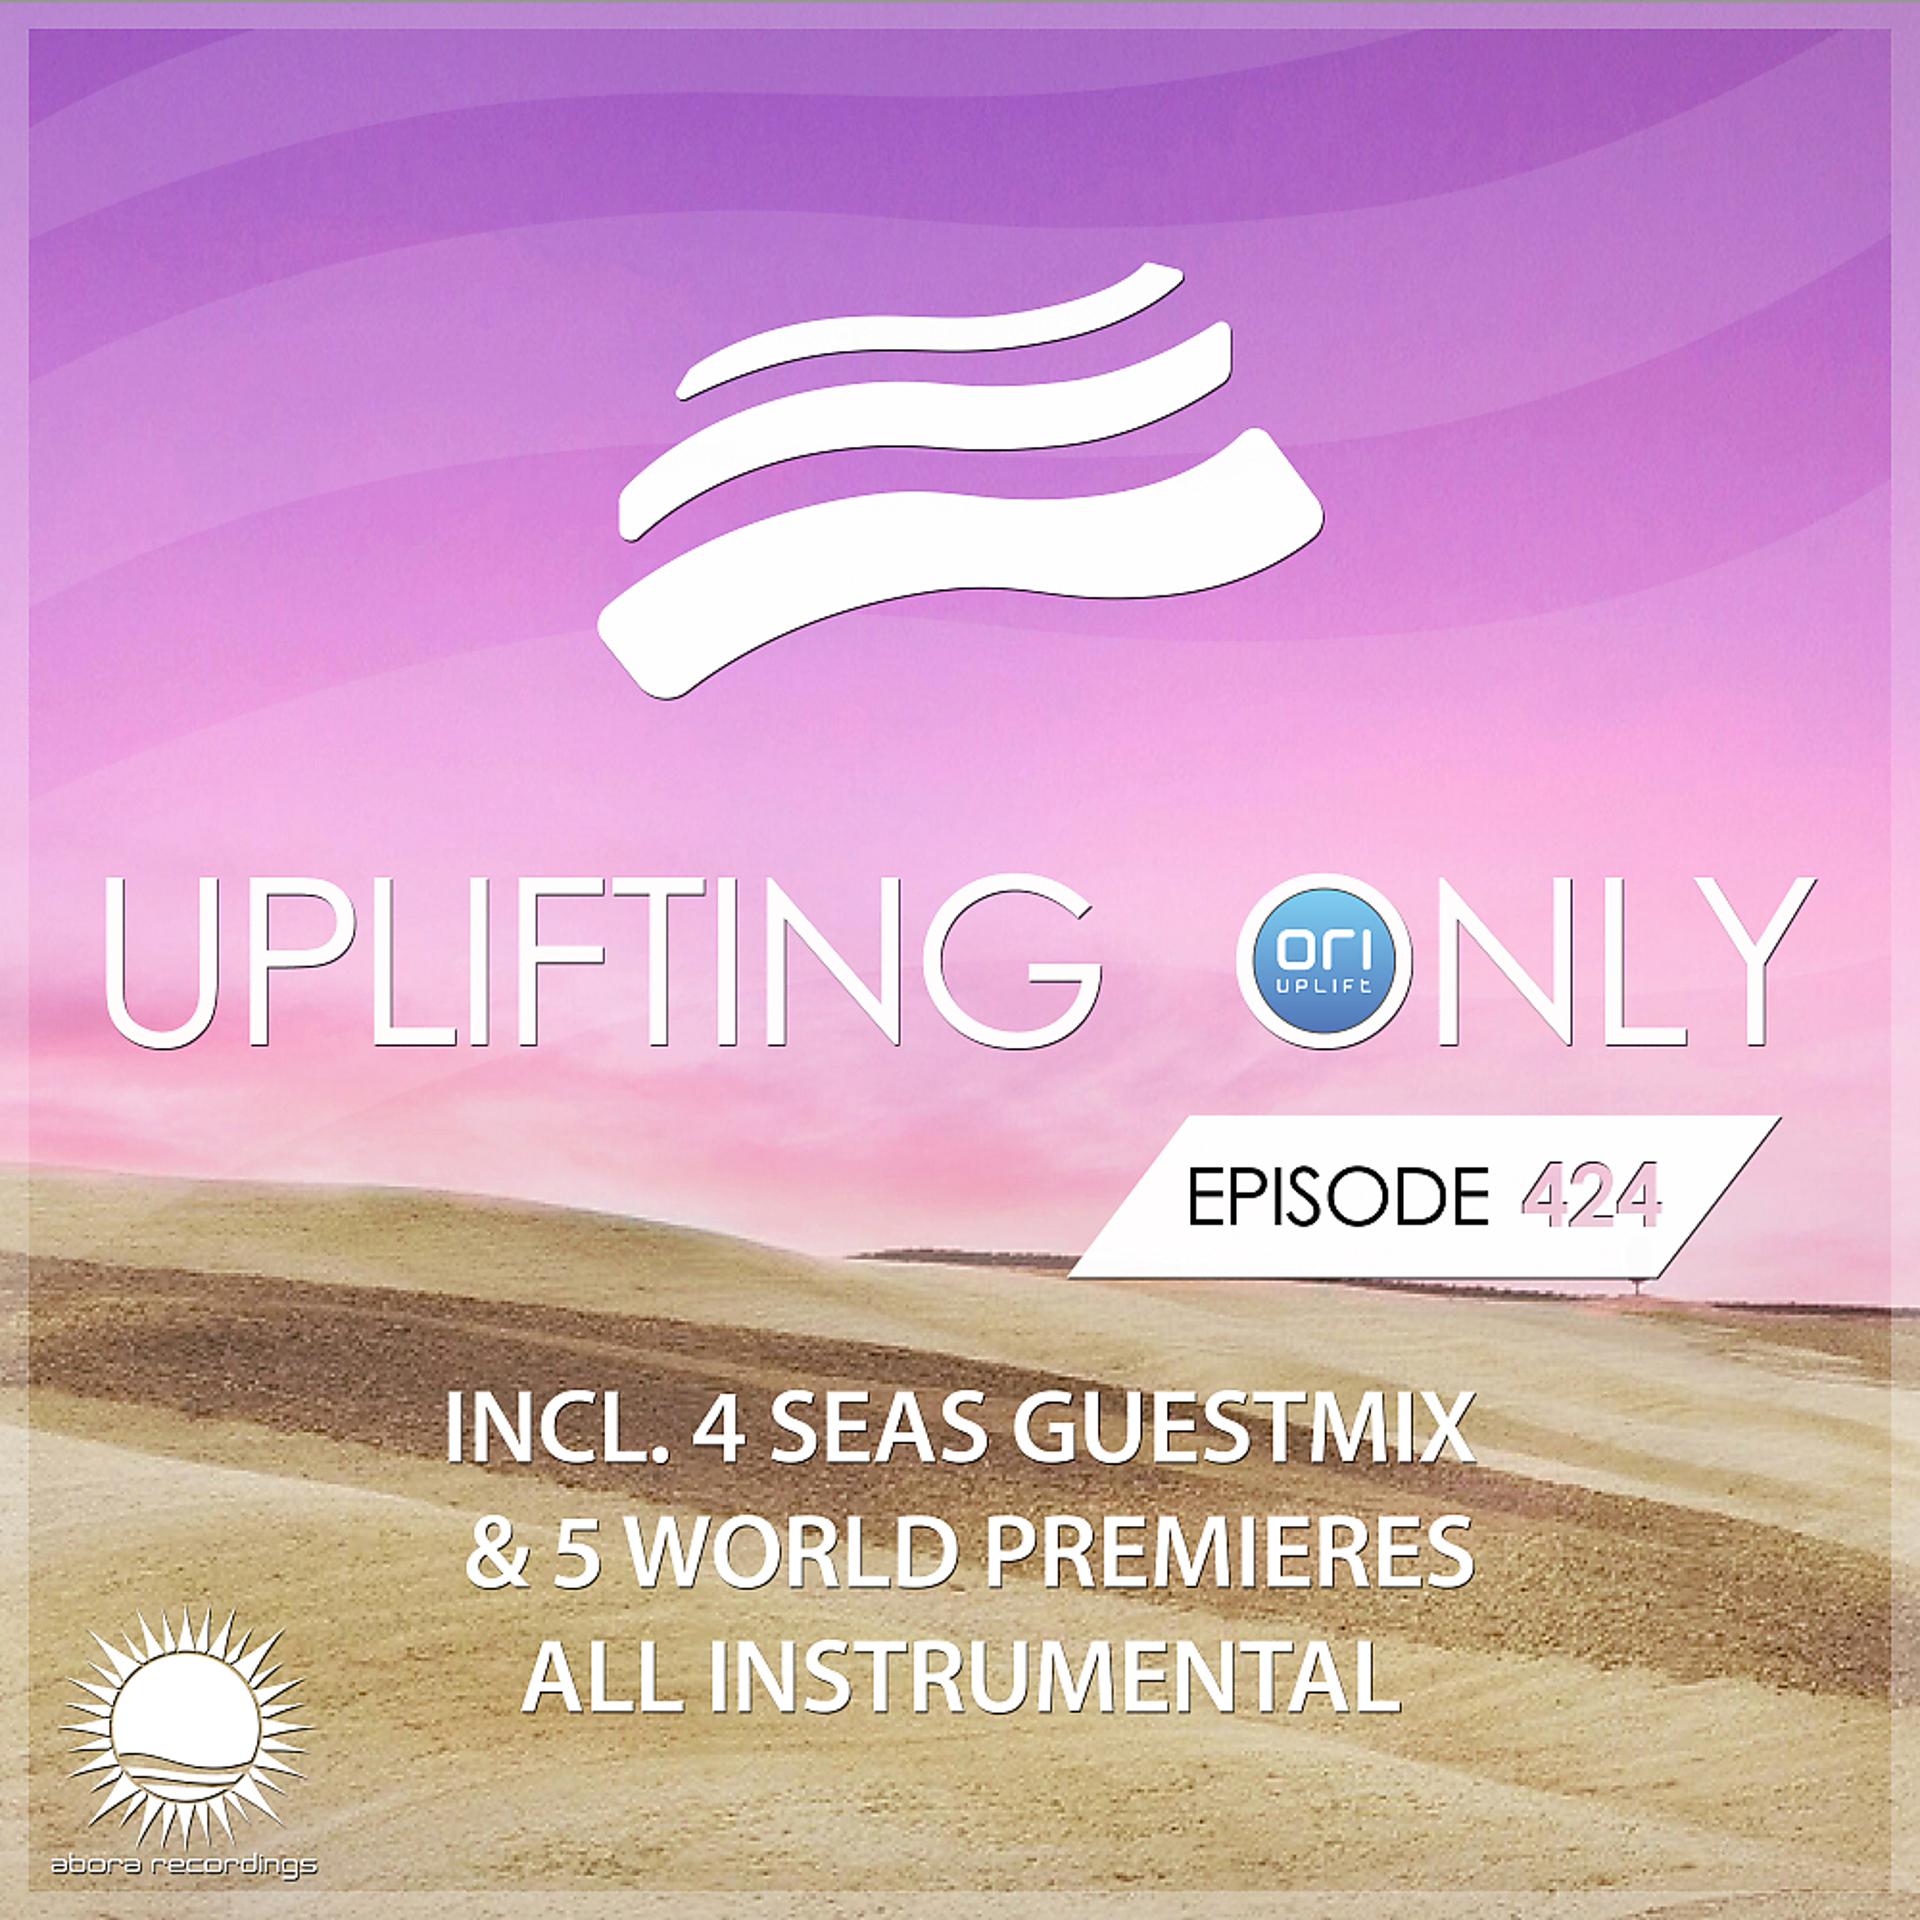 Постер альбома Uplifting Only Episode 424 (incl. 4 Seas Guestmix) [All Instrumental]